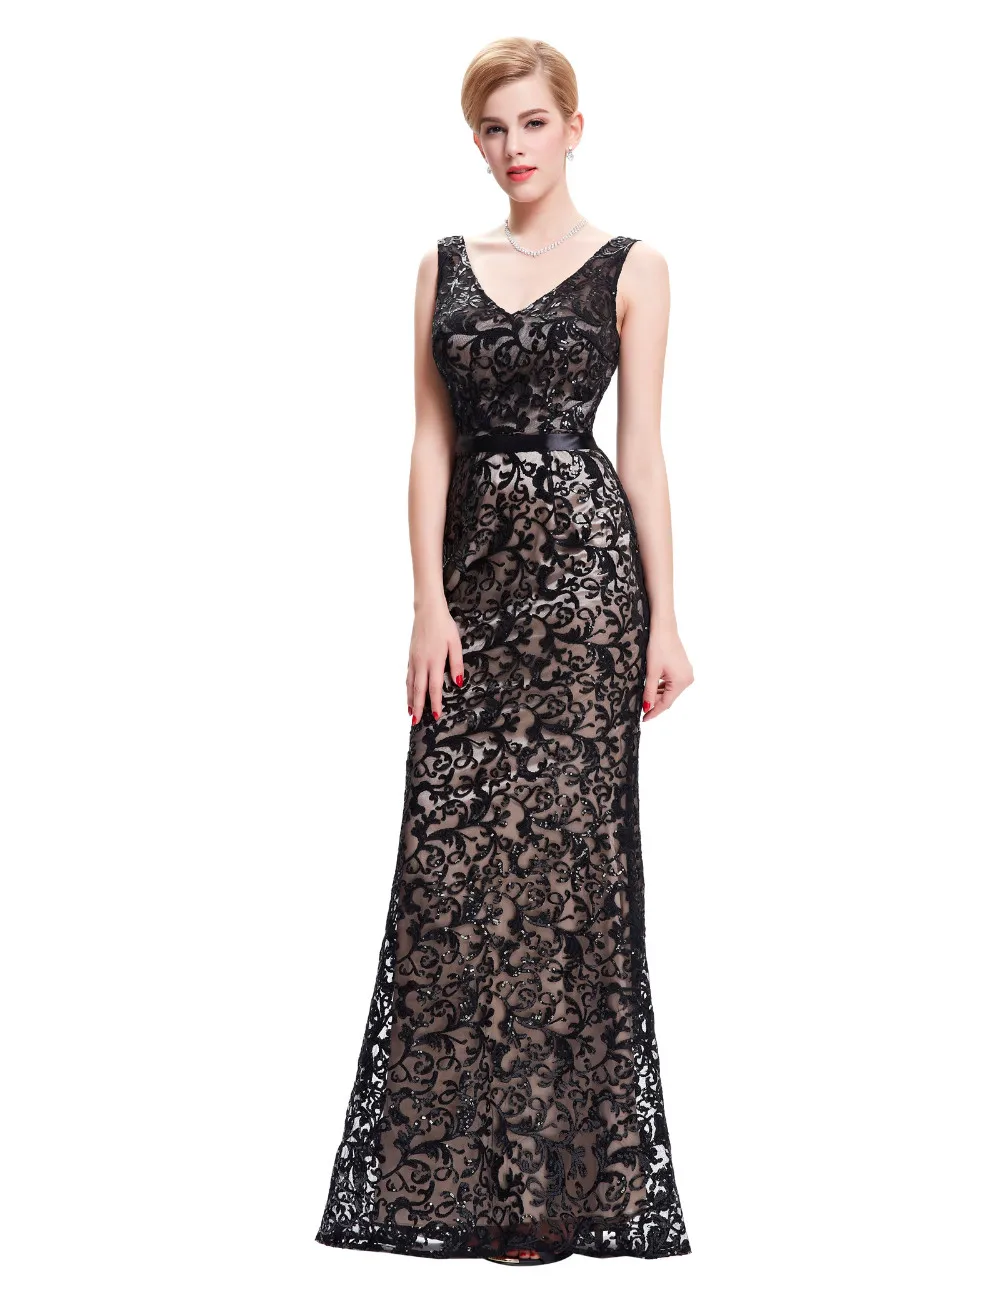 Double V Neck Beaded Lace Mother Of The Bride Black Dress